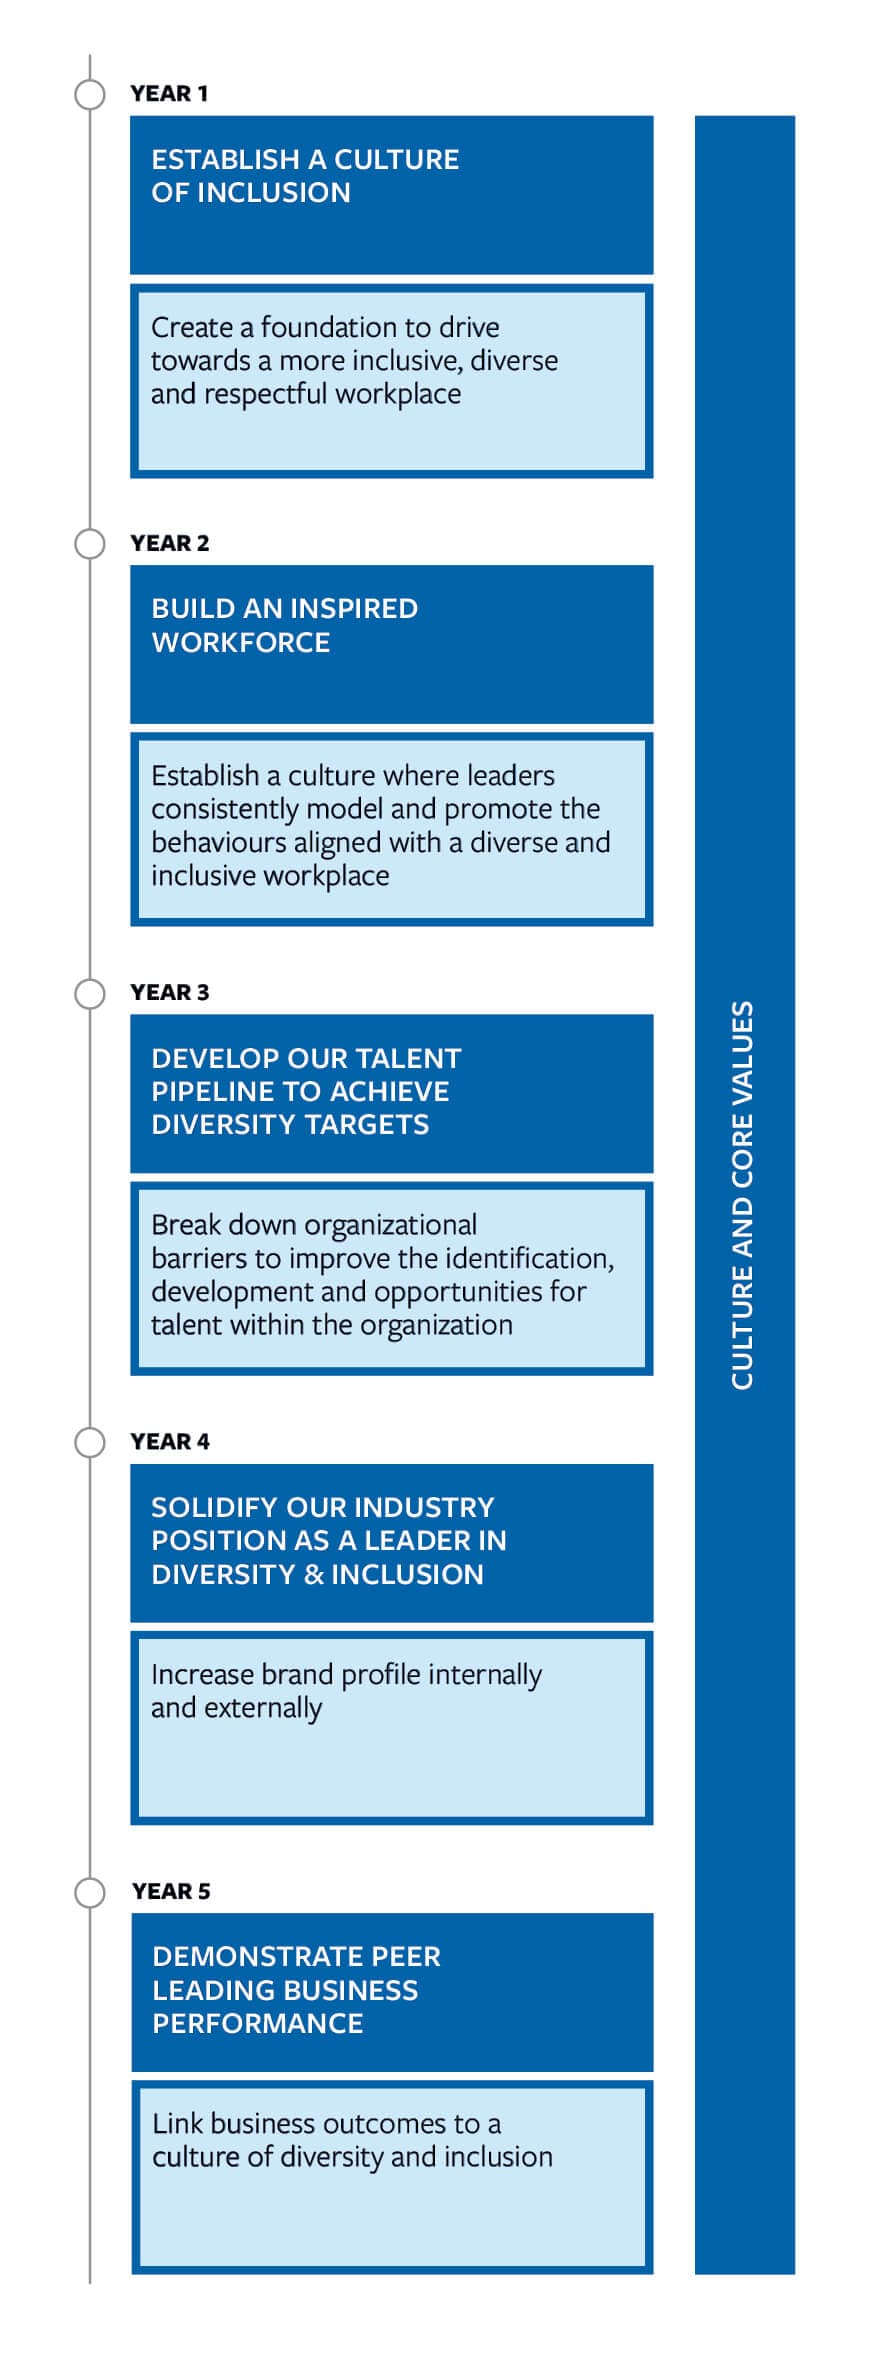 A graphic outlining Sherritt’s culture and core values: Year 1 – Establish a culture of inclusion: Create a foundation to drive towards a more inclusive, diverse and respectful workplace; Year 2 – Build an inspired workforce: Establish a culture where leaders consistently model and promote the behaviours aligned with a diverse and inclusive workplace; Year 3 – Develop our talent pipeline to achieve diversity targets: Break down organizational barriers to improve the identification, development and opportunities for talent within the organization; Year 4 – Solidify our industry position as a leader in diversity and inclusion: Increase brand profile internally and externally; Year 5 – Demonstrate peer-leading business performance: Link business outcomes to a culture of diversity and inclusion